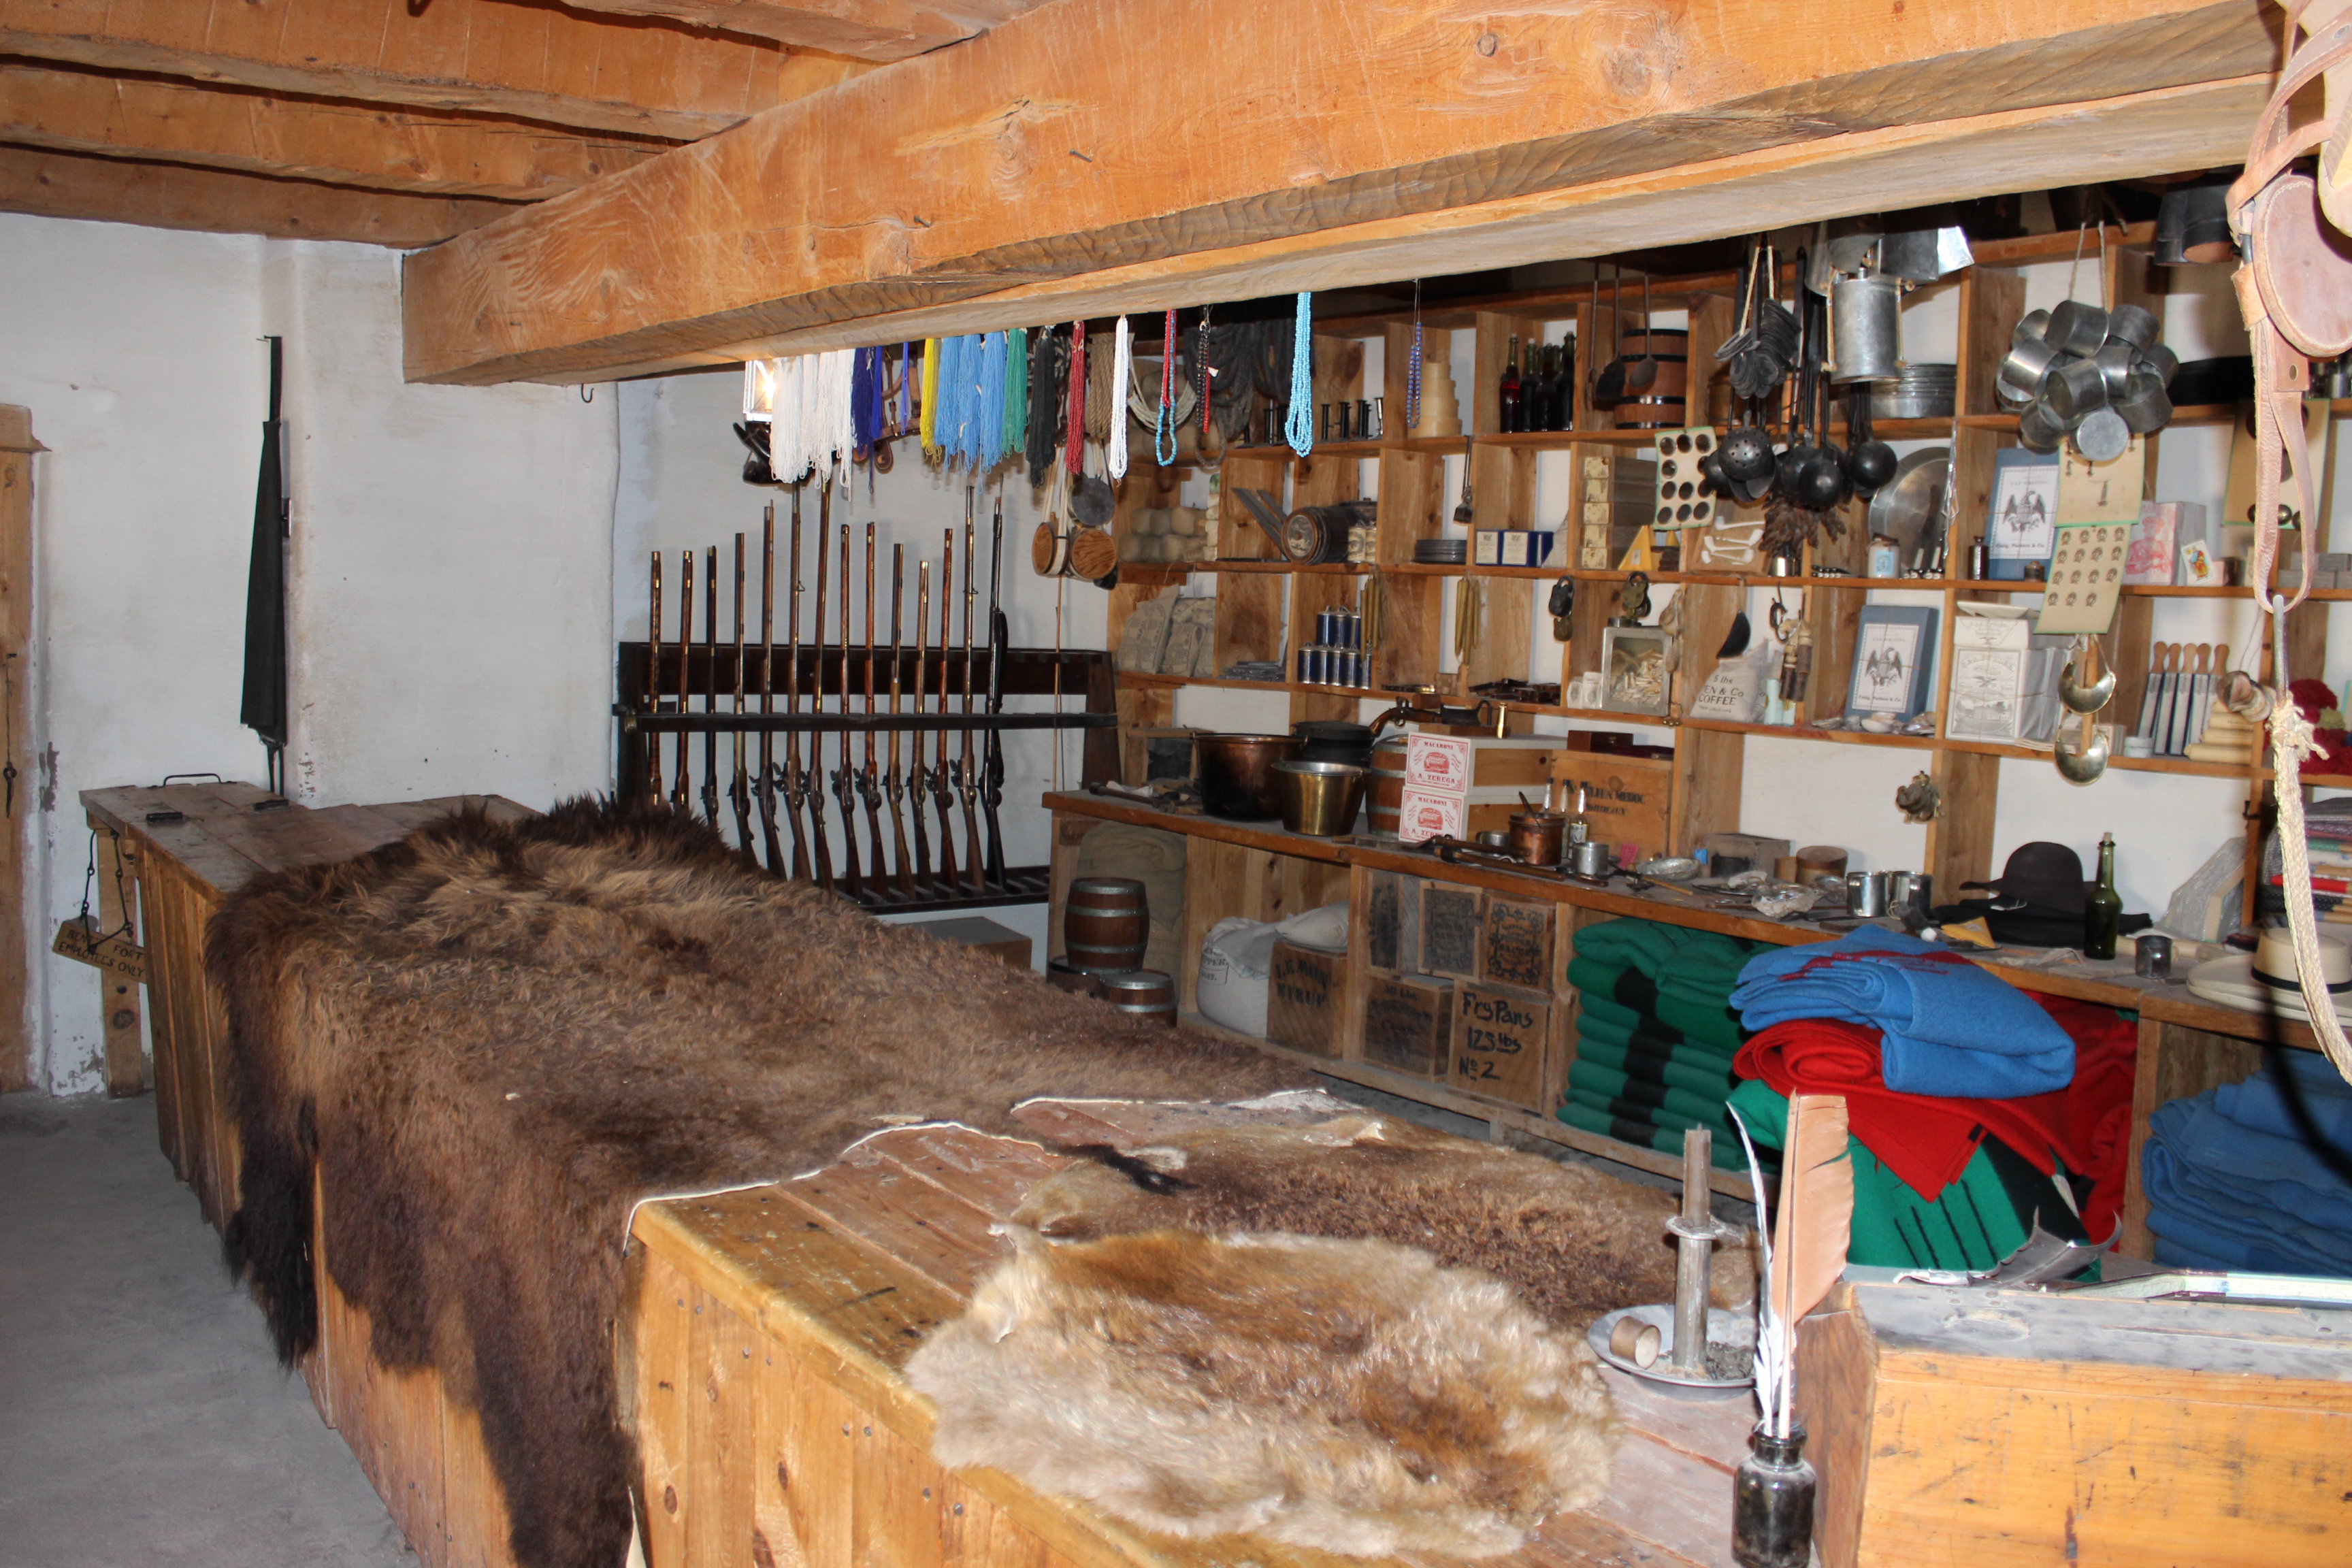 Trade Room at Bent's Fort with various trade items including animal hides, guns, blankets, etc.